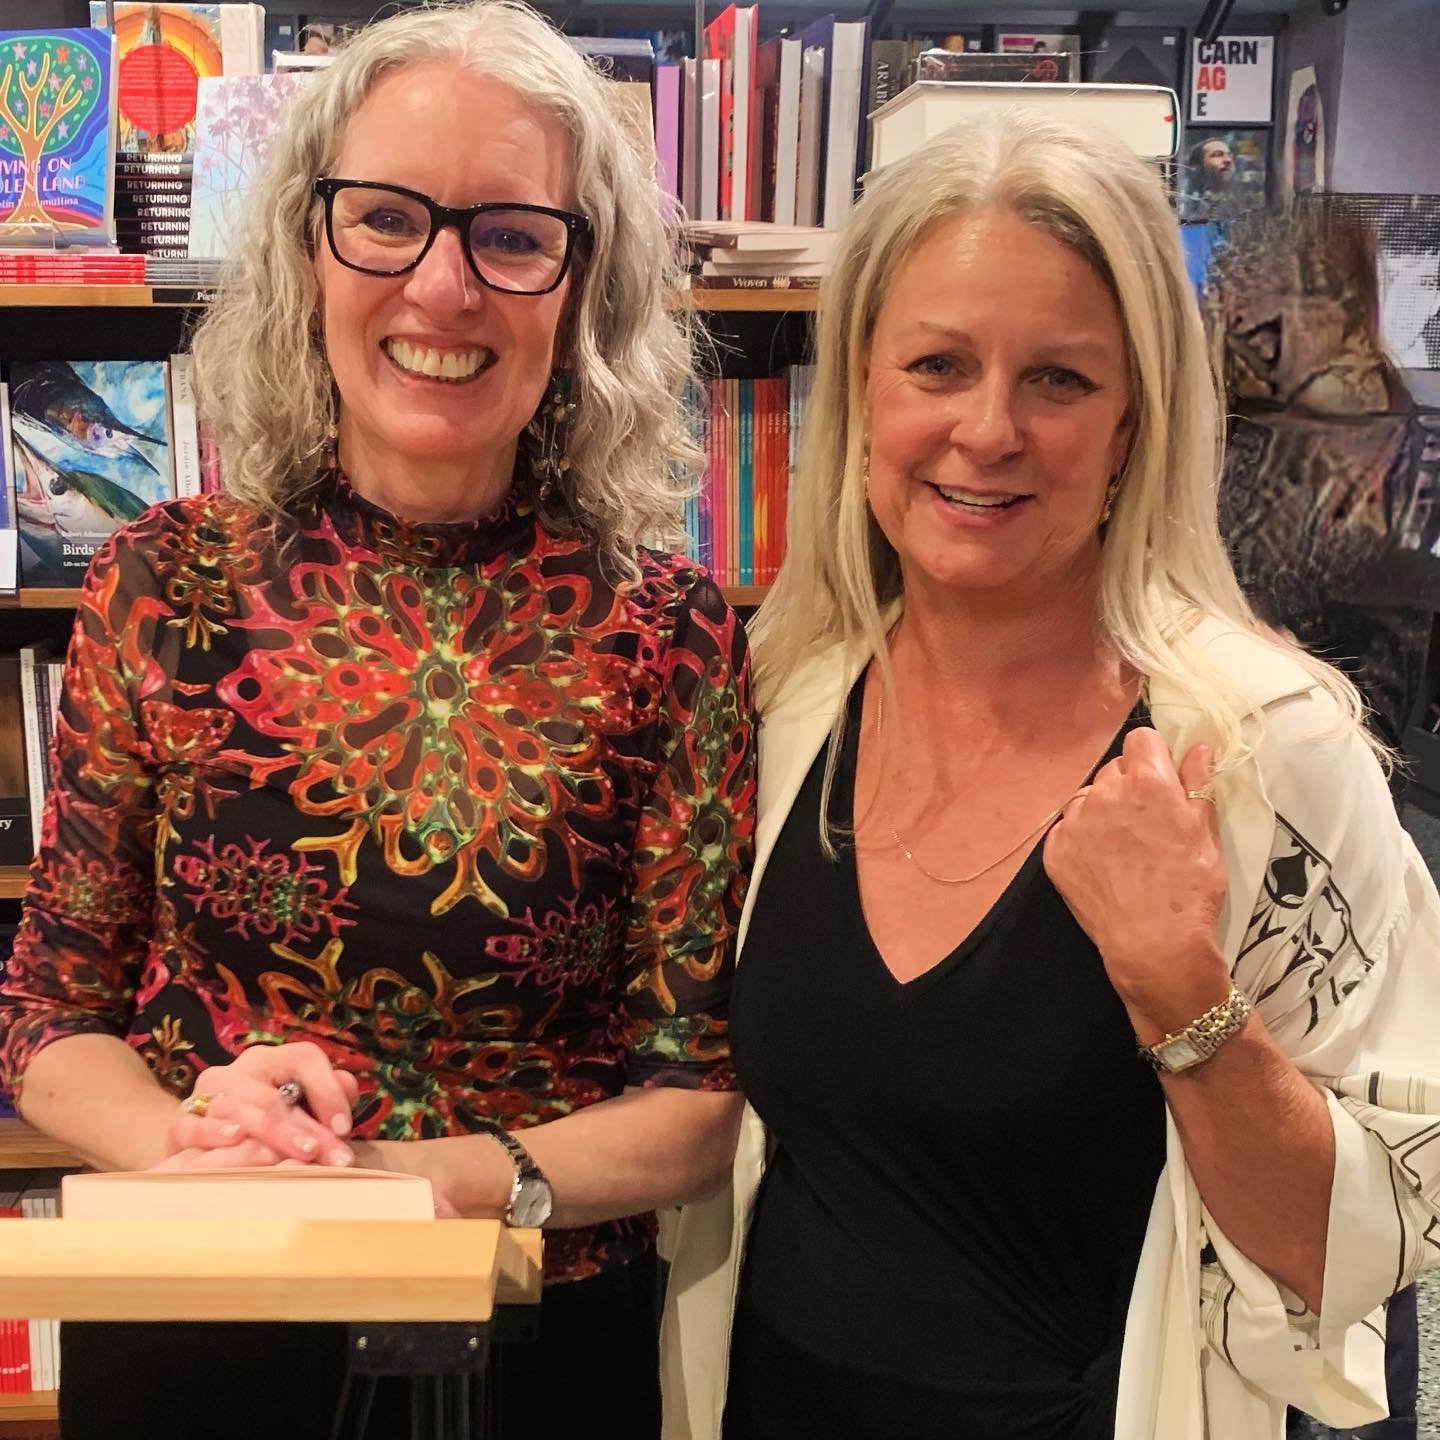 Brimming with celebration! A wonderful launch of Trish Bolton&rsquo;s WHENEVER YOU&rsquo;RE READY all the joy in the room together with a great conversation from Lucy Treloar and Trish about life changing and enduring friendship. 

 #wheneveryourerea